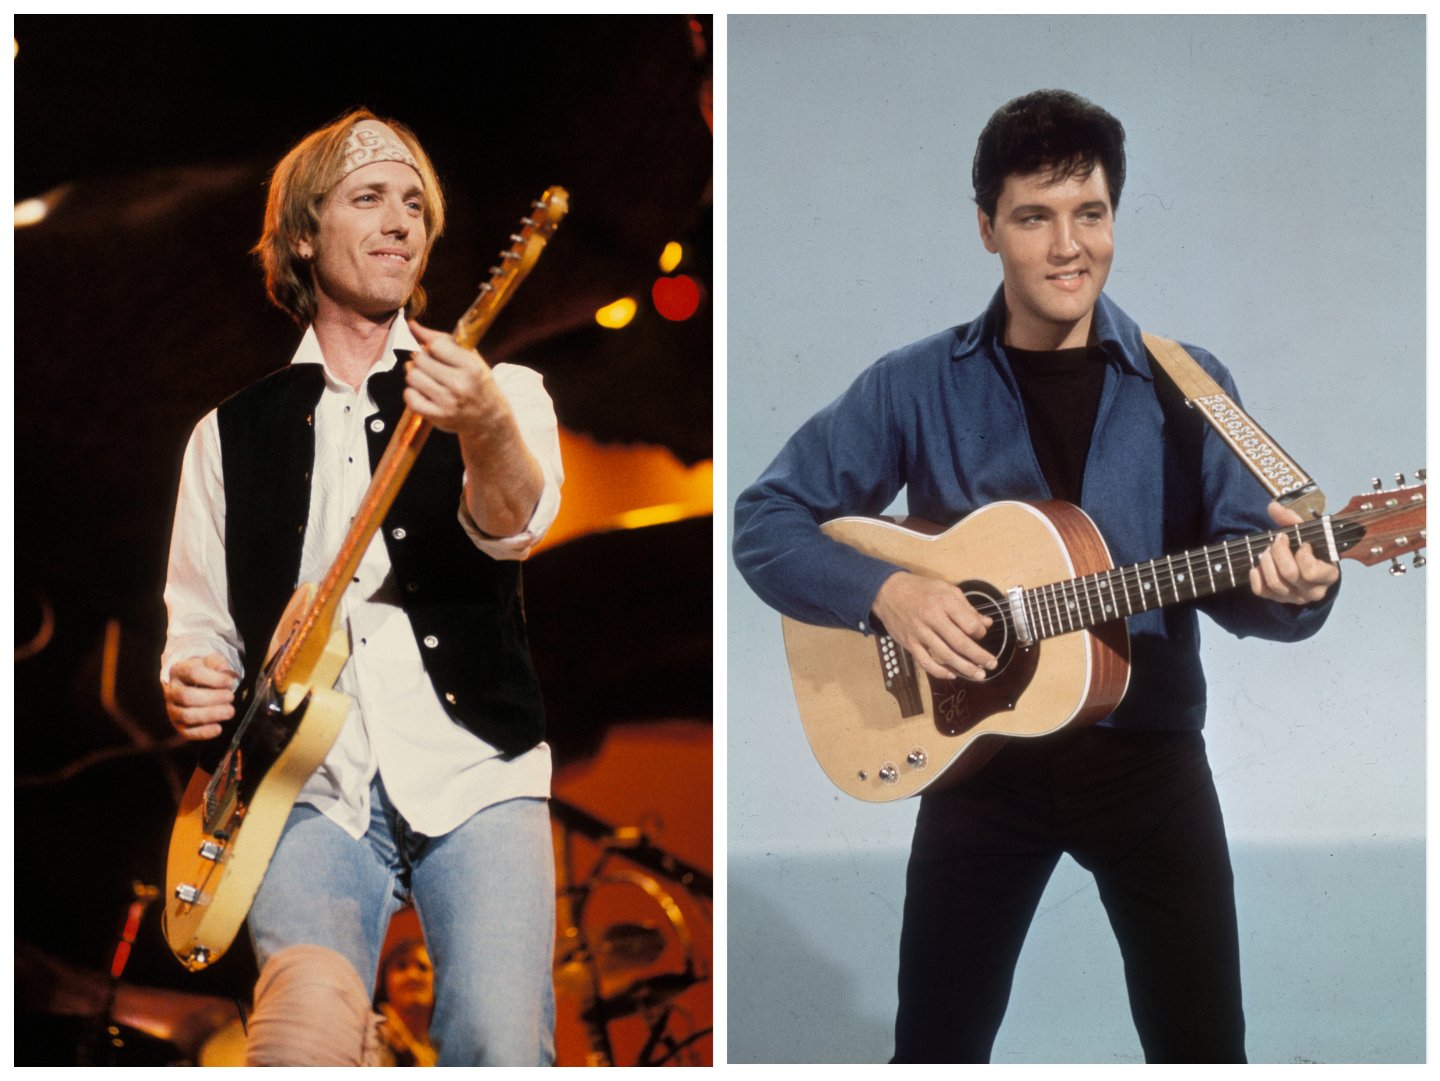 Tom Petty wears a bandana around his head and plays guitar and Elvis wears a blue shirt and plays guitar.